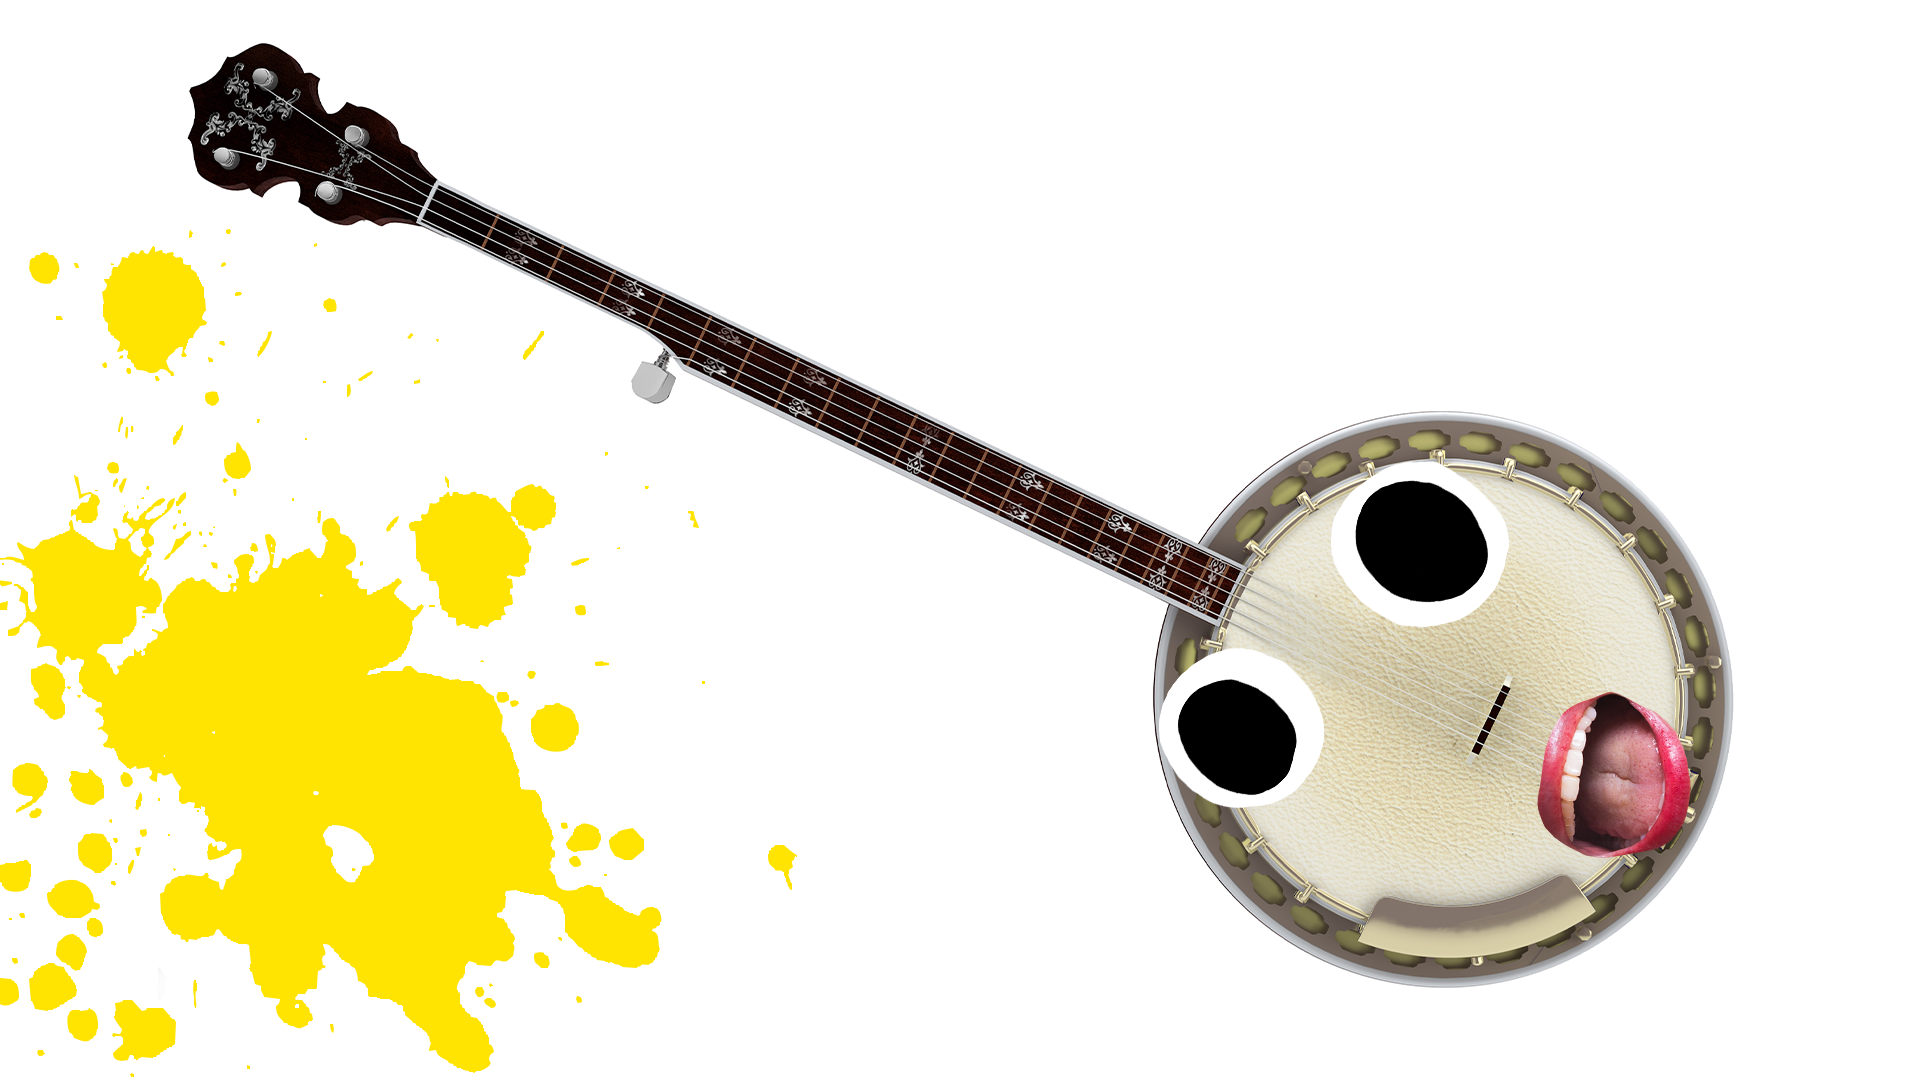 Banjo with derpy face and yellow splat on white background 